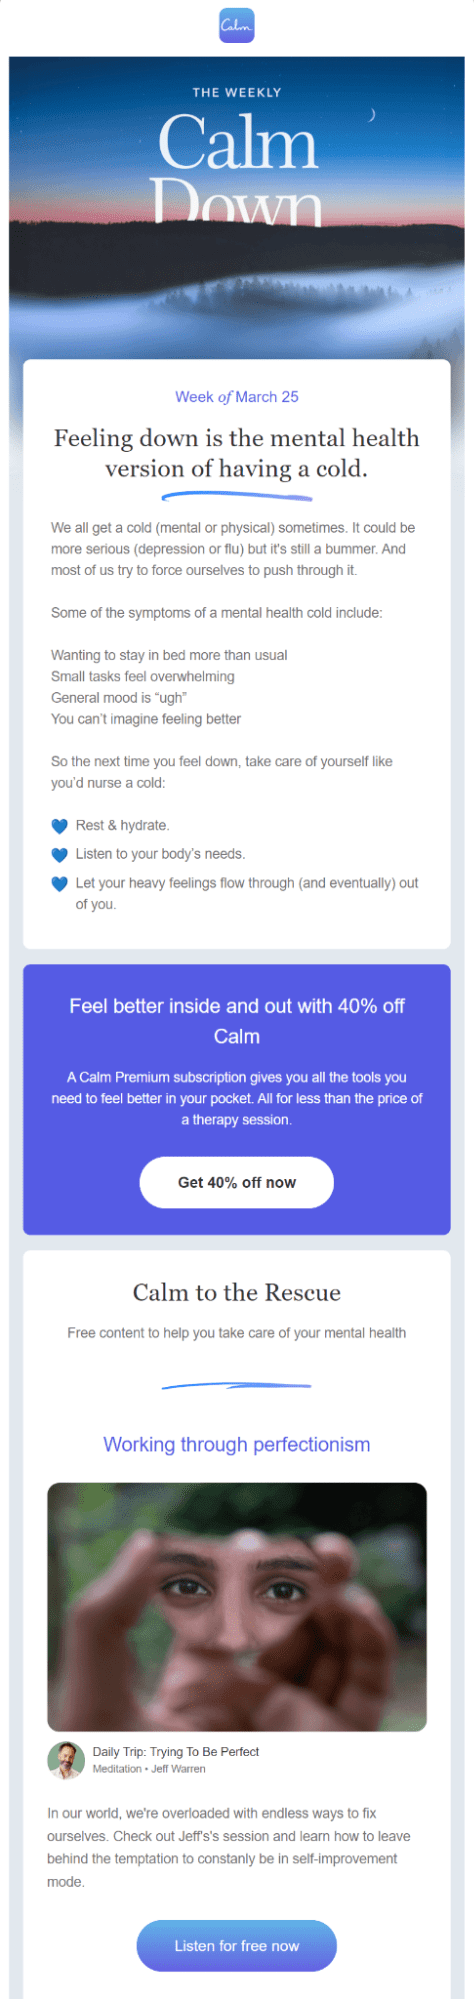 An email with tips on how to take care of mental health